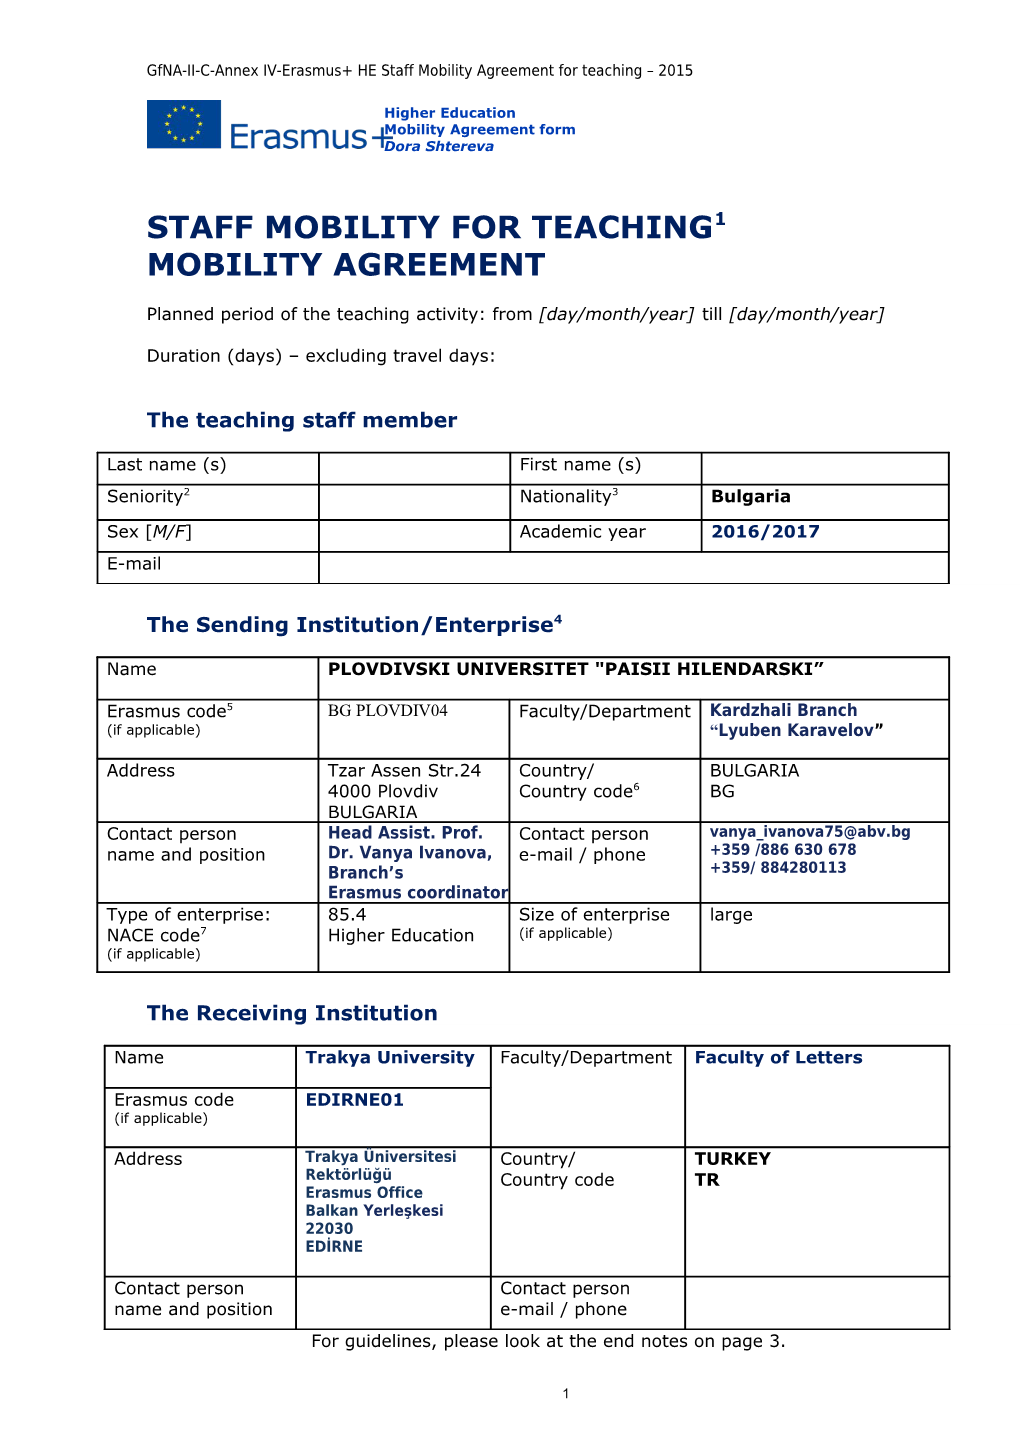 Staff Mobility for Teaching